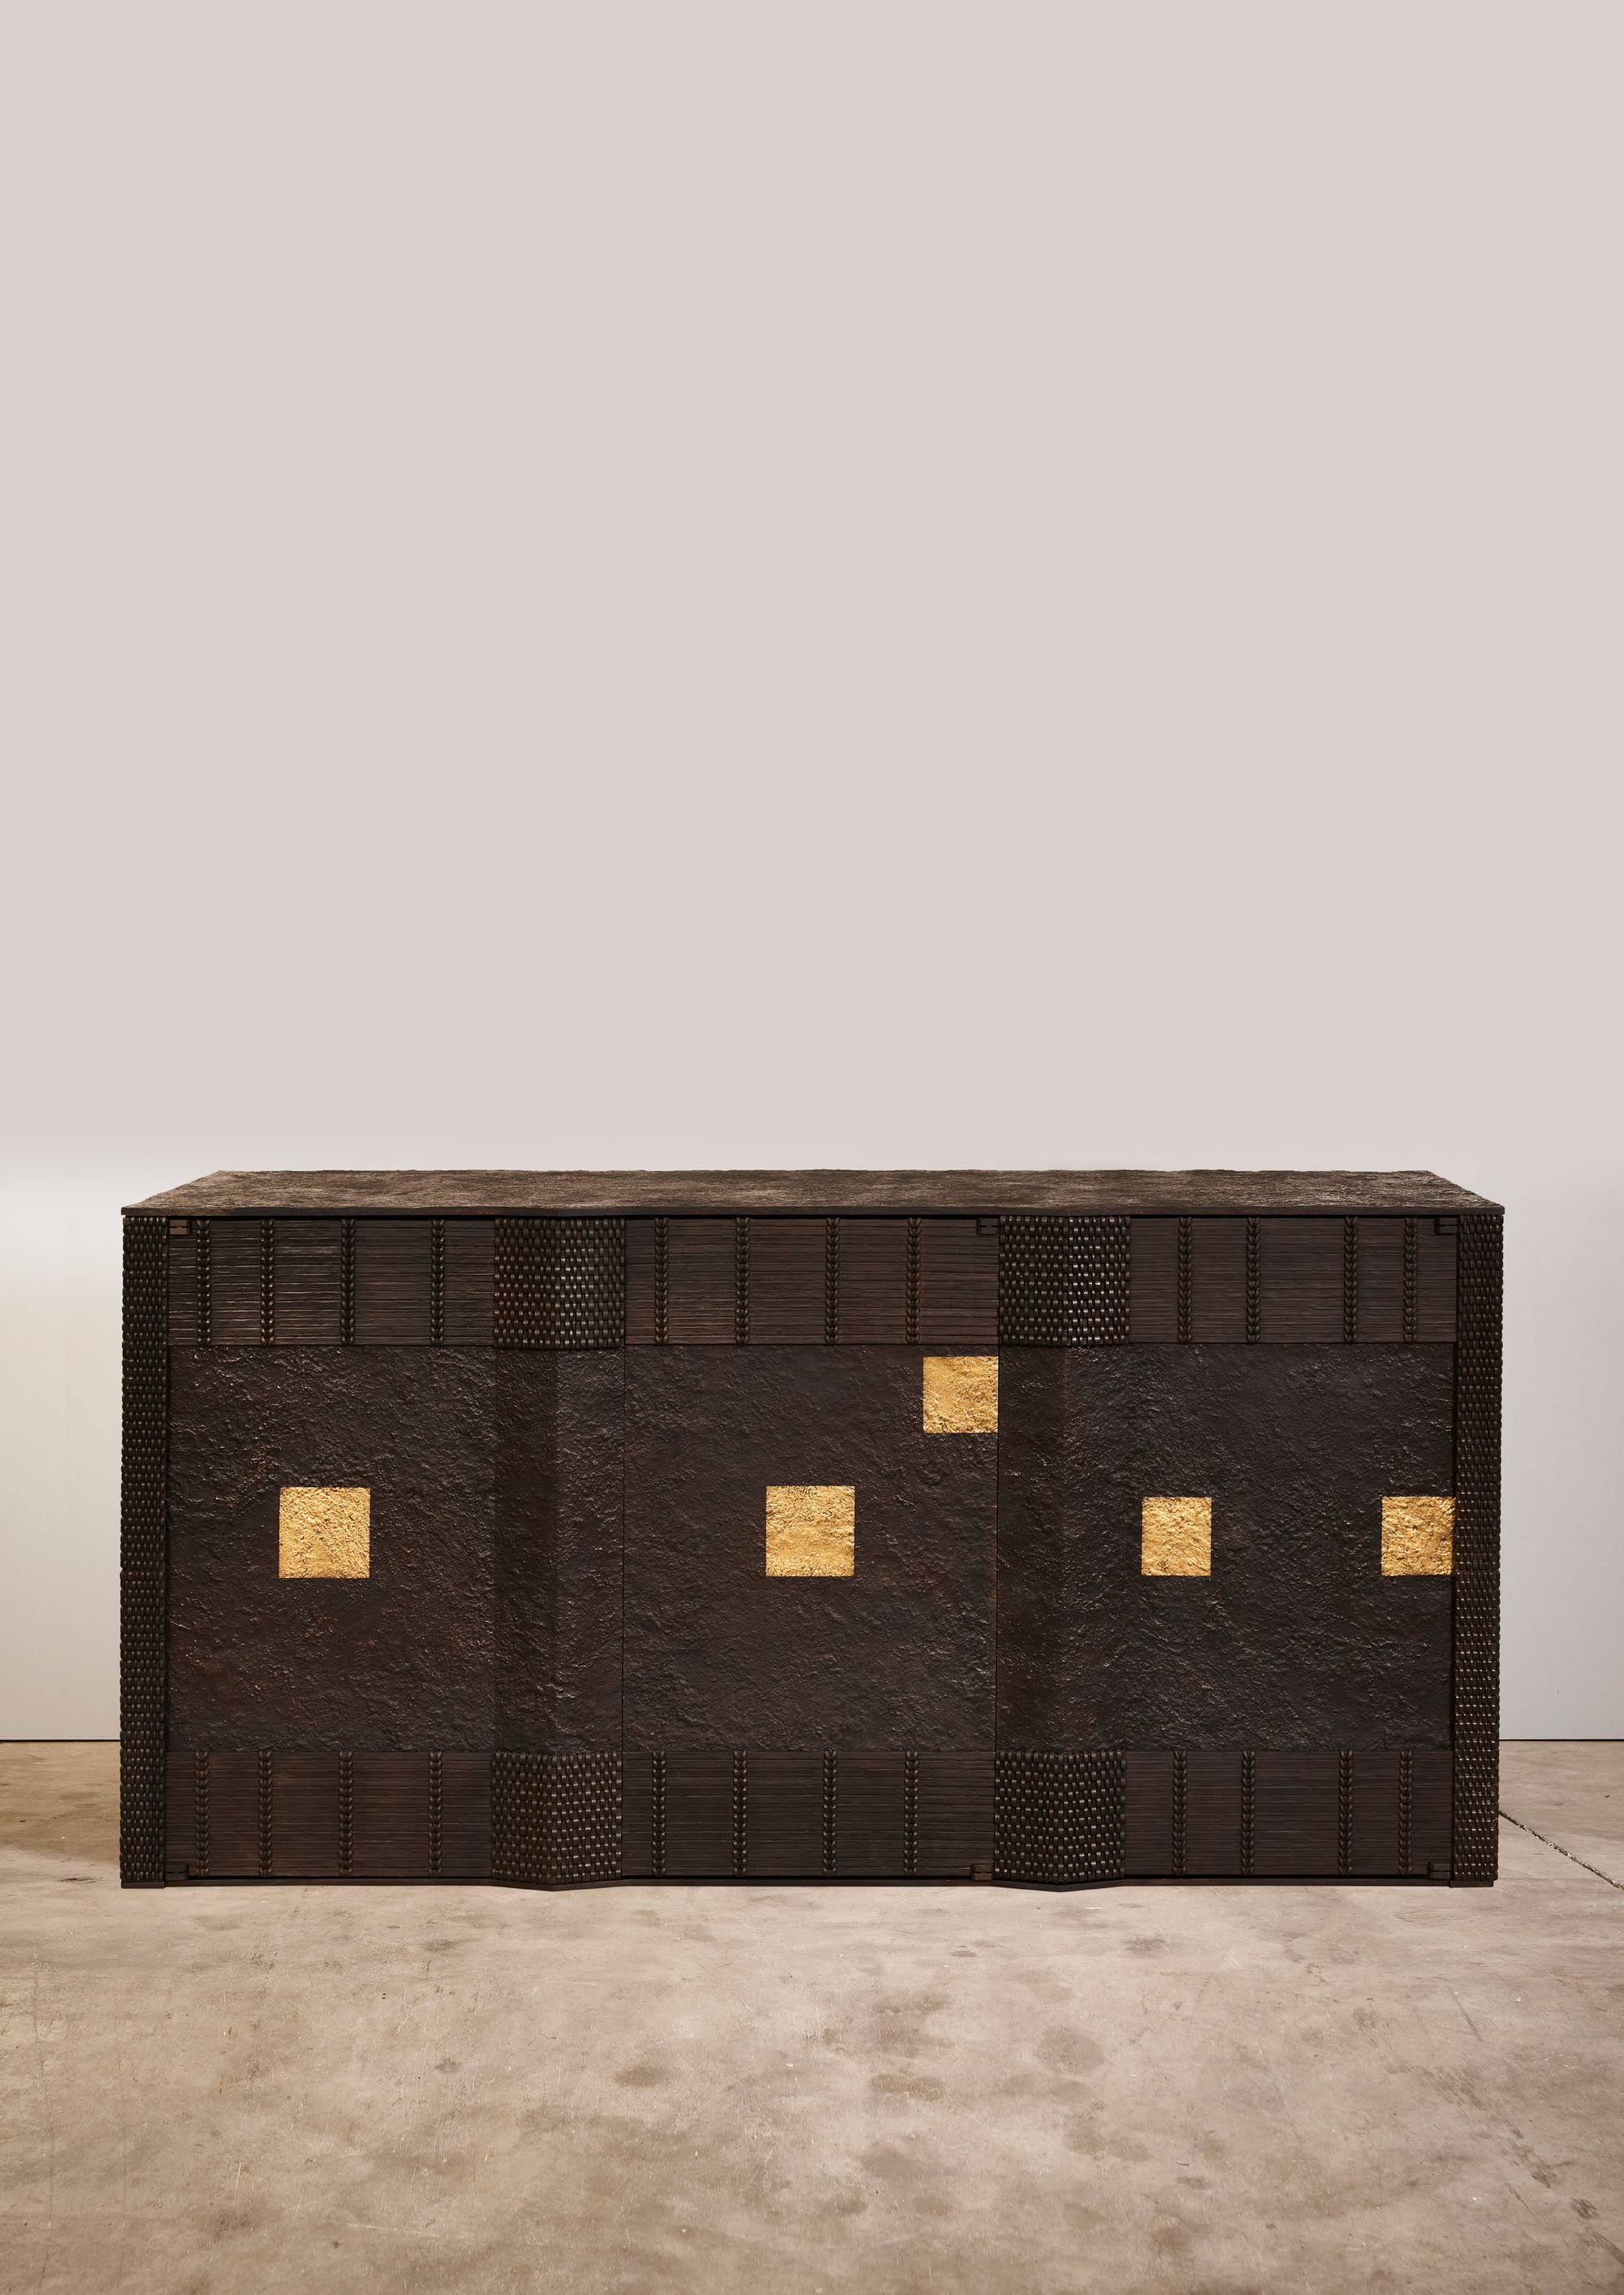 Project Image for Bronze Boxes Series IV